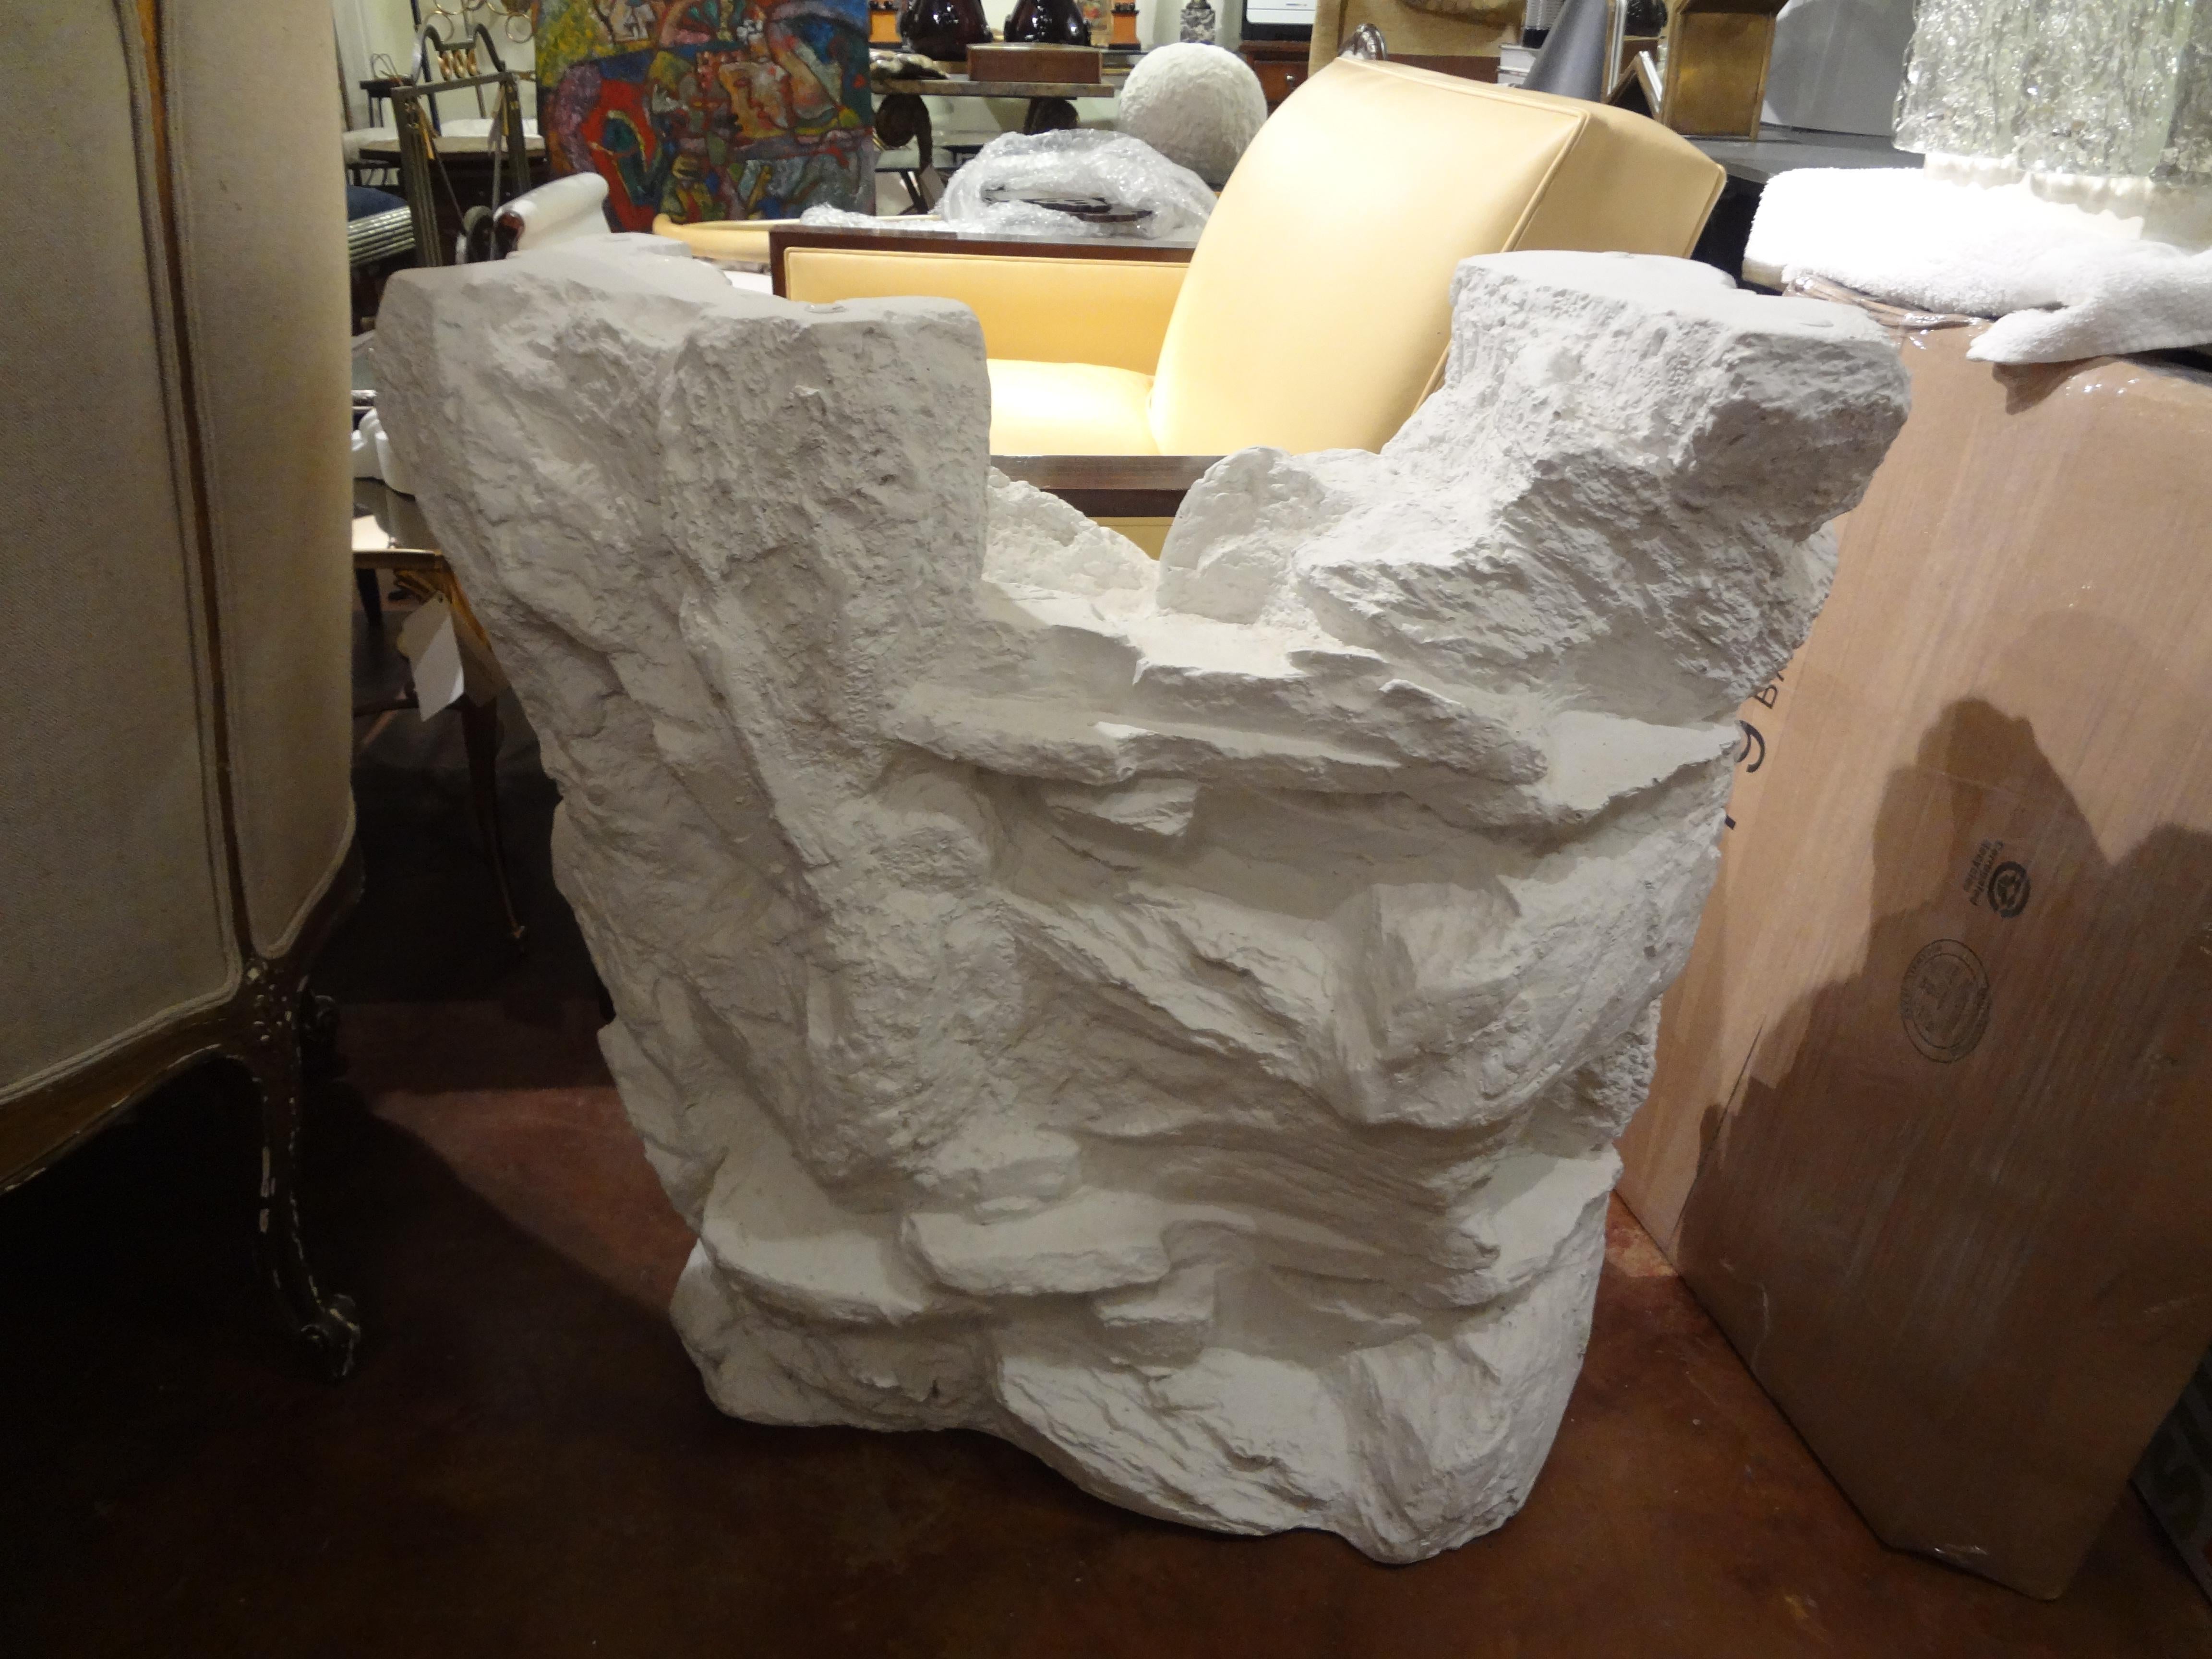 Fantastic midcentury organic modern plaster faux rock quarry table base. This beautiful substantial plaster faux rock table base can be a dining table base, console table base or sofa table base. Ready for your choice of a custom glass top depending